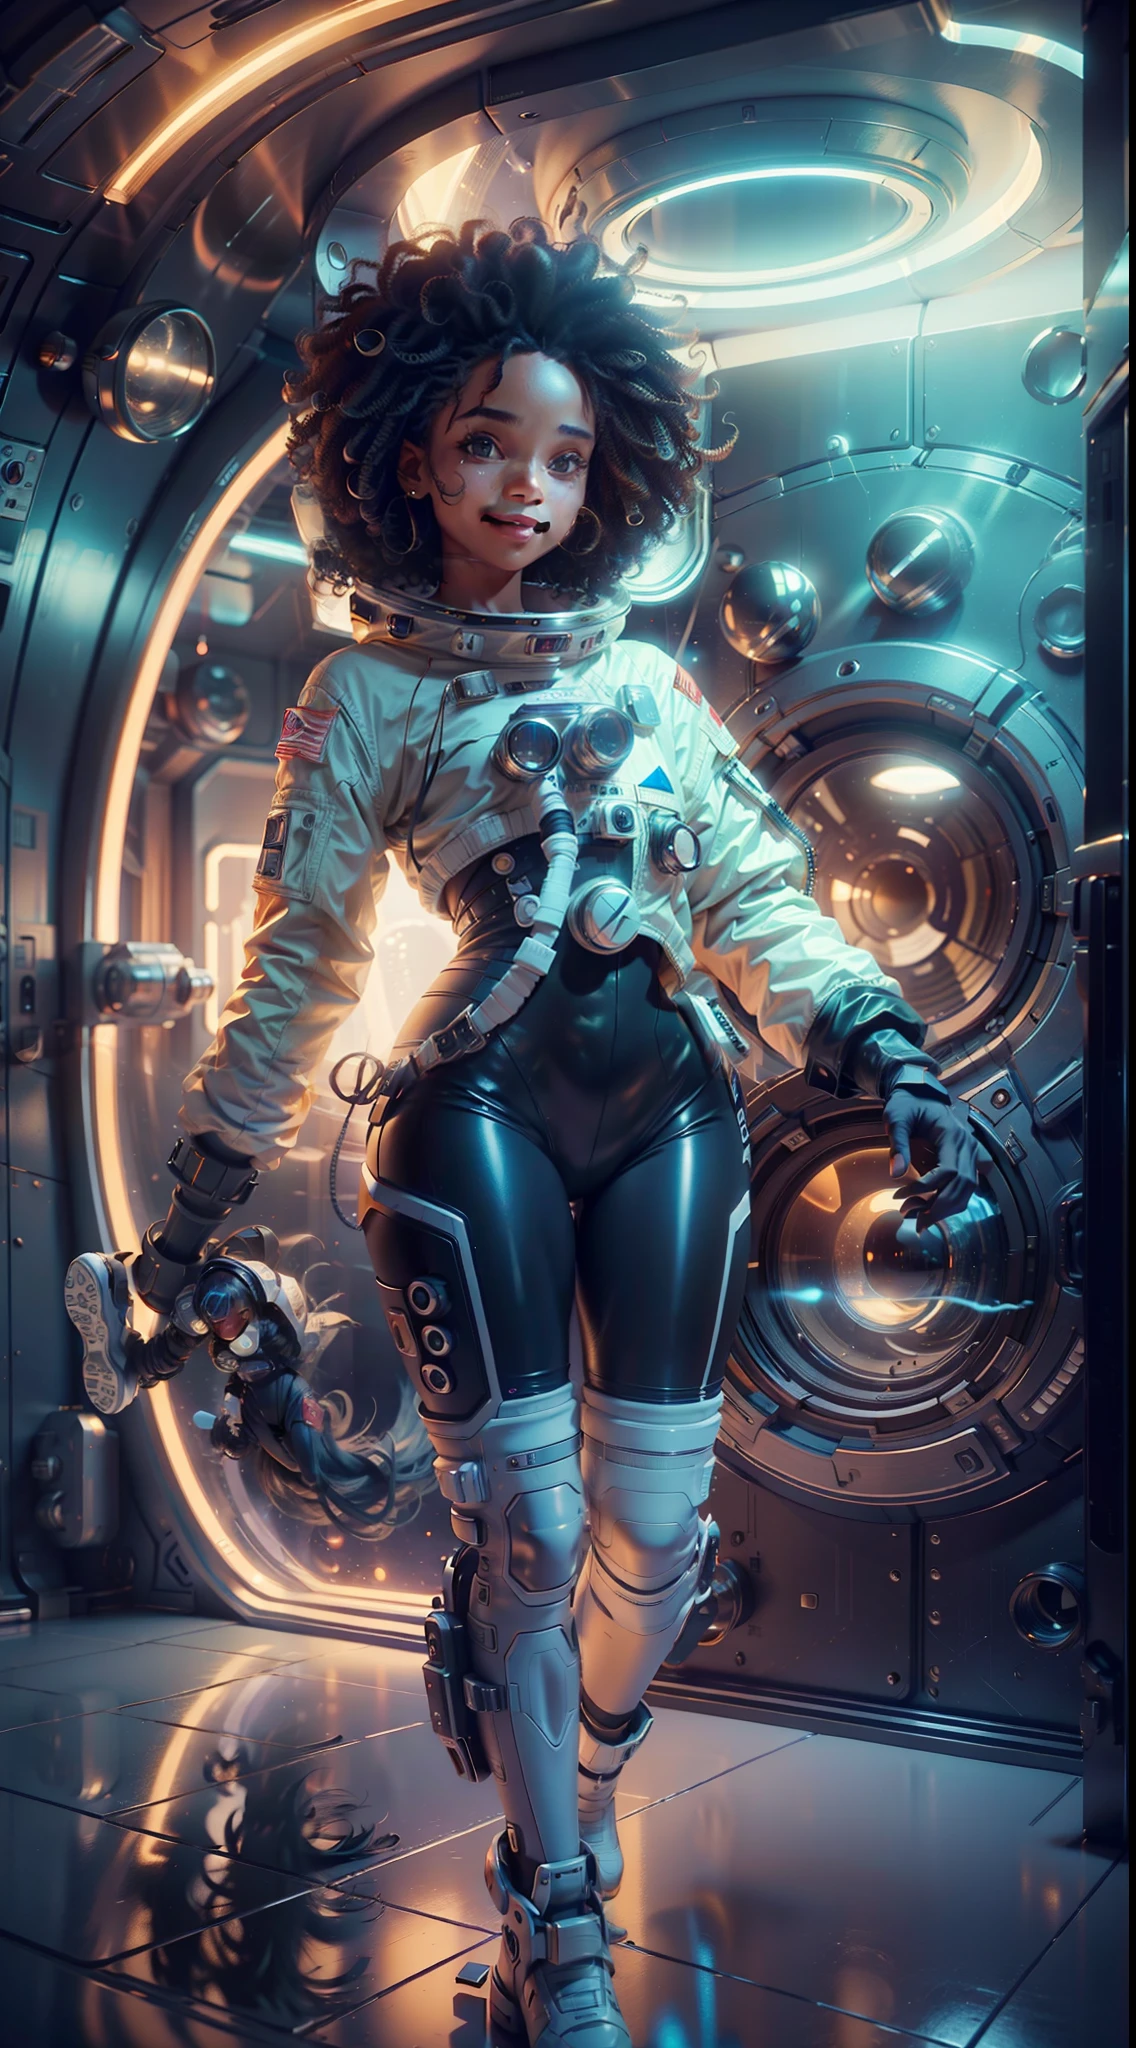 A full-body girl with black skin and curly hair floats inside a large gravitational capsule, (perfect smile: 1.8), golden ratio, anime portrait Space Cadet Girl, of a 2 0 1 9 Sci Fi 8 K movie, Zoe Kravitz futuristic astronaut, 8 K movie still, still 8 K movie, Zoe Kravitz as an astronaut,  in space suit, girl in space, panoramic view, portrait 8k render, beautiful woman in spacesuit, amplitude, open plan, cinematic, photorealism, Photographed on a Canon EOS-1D X Mark III, 150mm lens, F/0.8, sharp focus, volumetric fog, dramatic light, volumetric light, neon, 8k uhd, dslr camera, maximum quality, film grain, anamorphic, amplitude